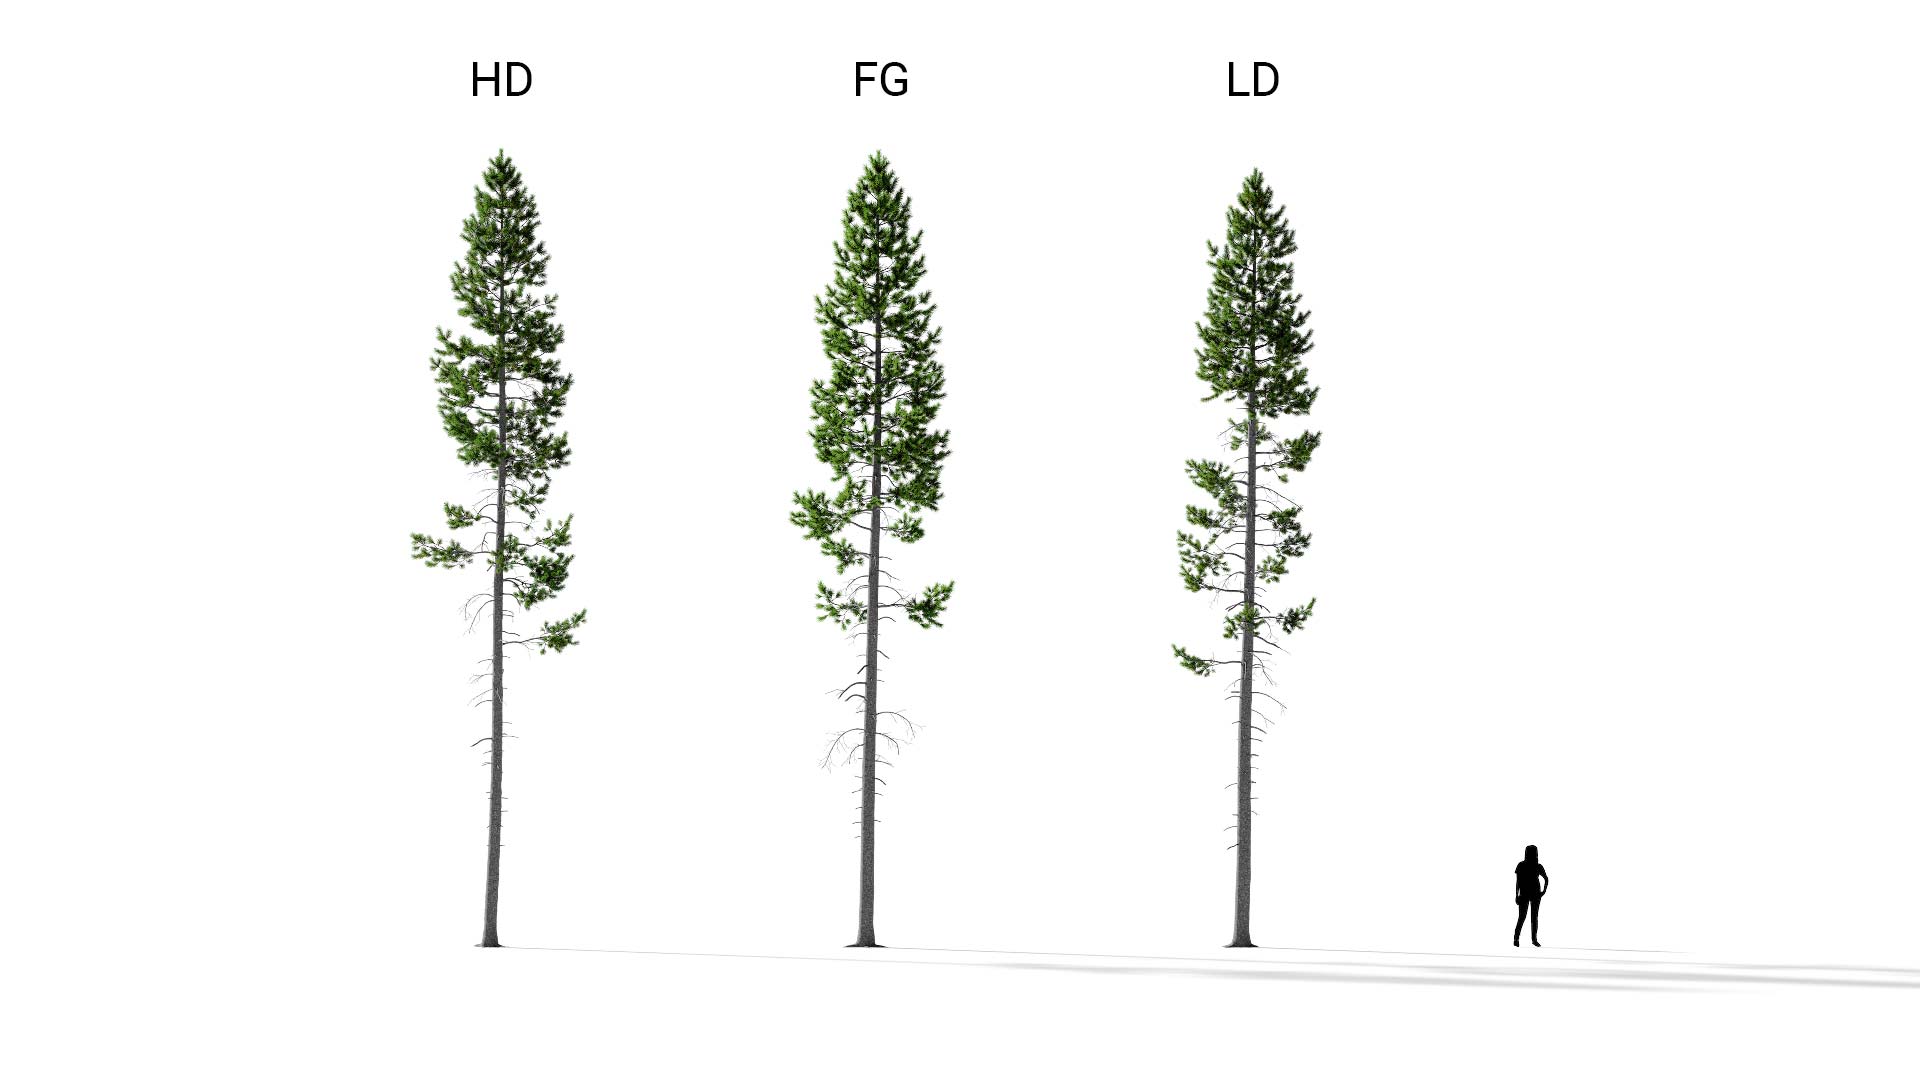 3D model of the Rocky Mountain lodgepole pine forest Pinus contorta var latifolia forest included versions